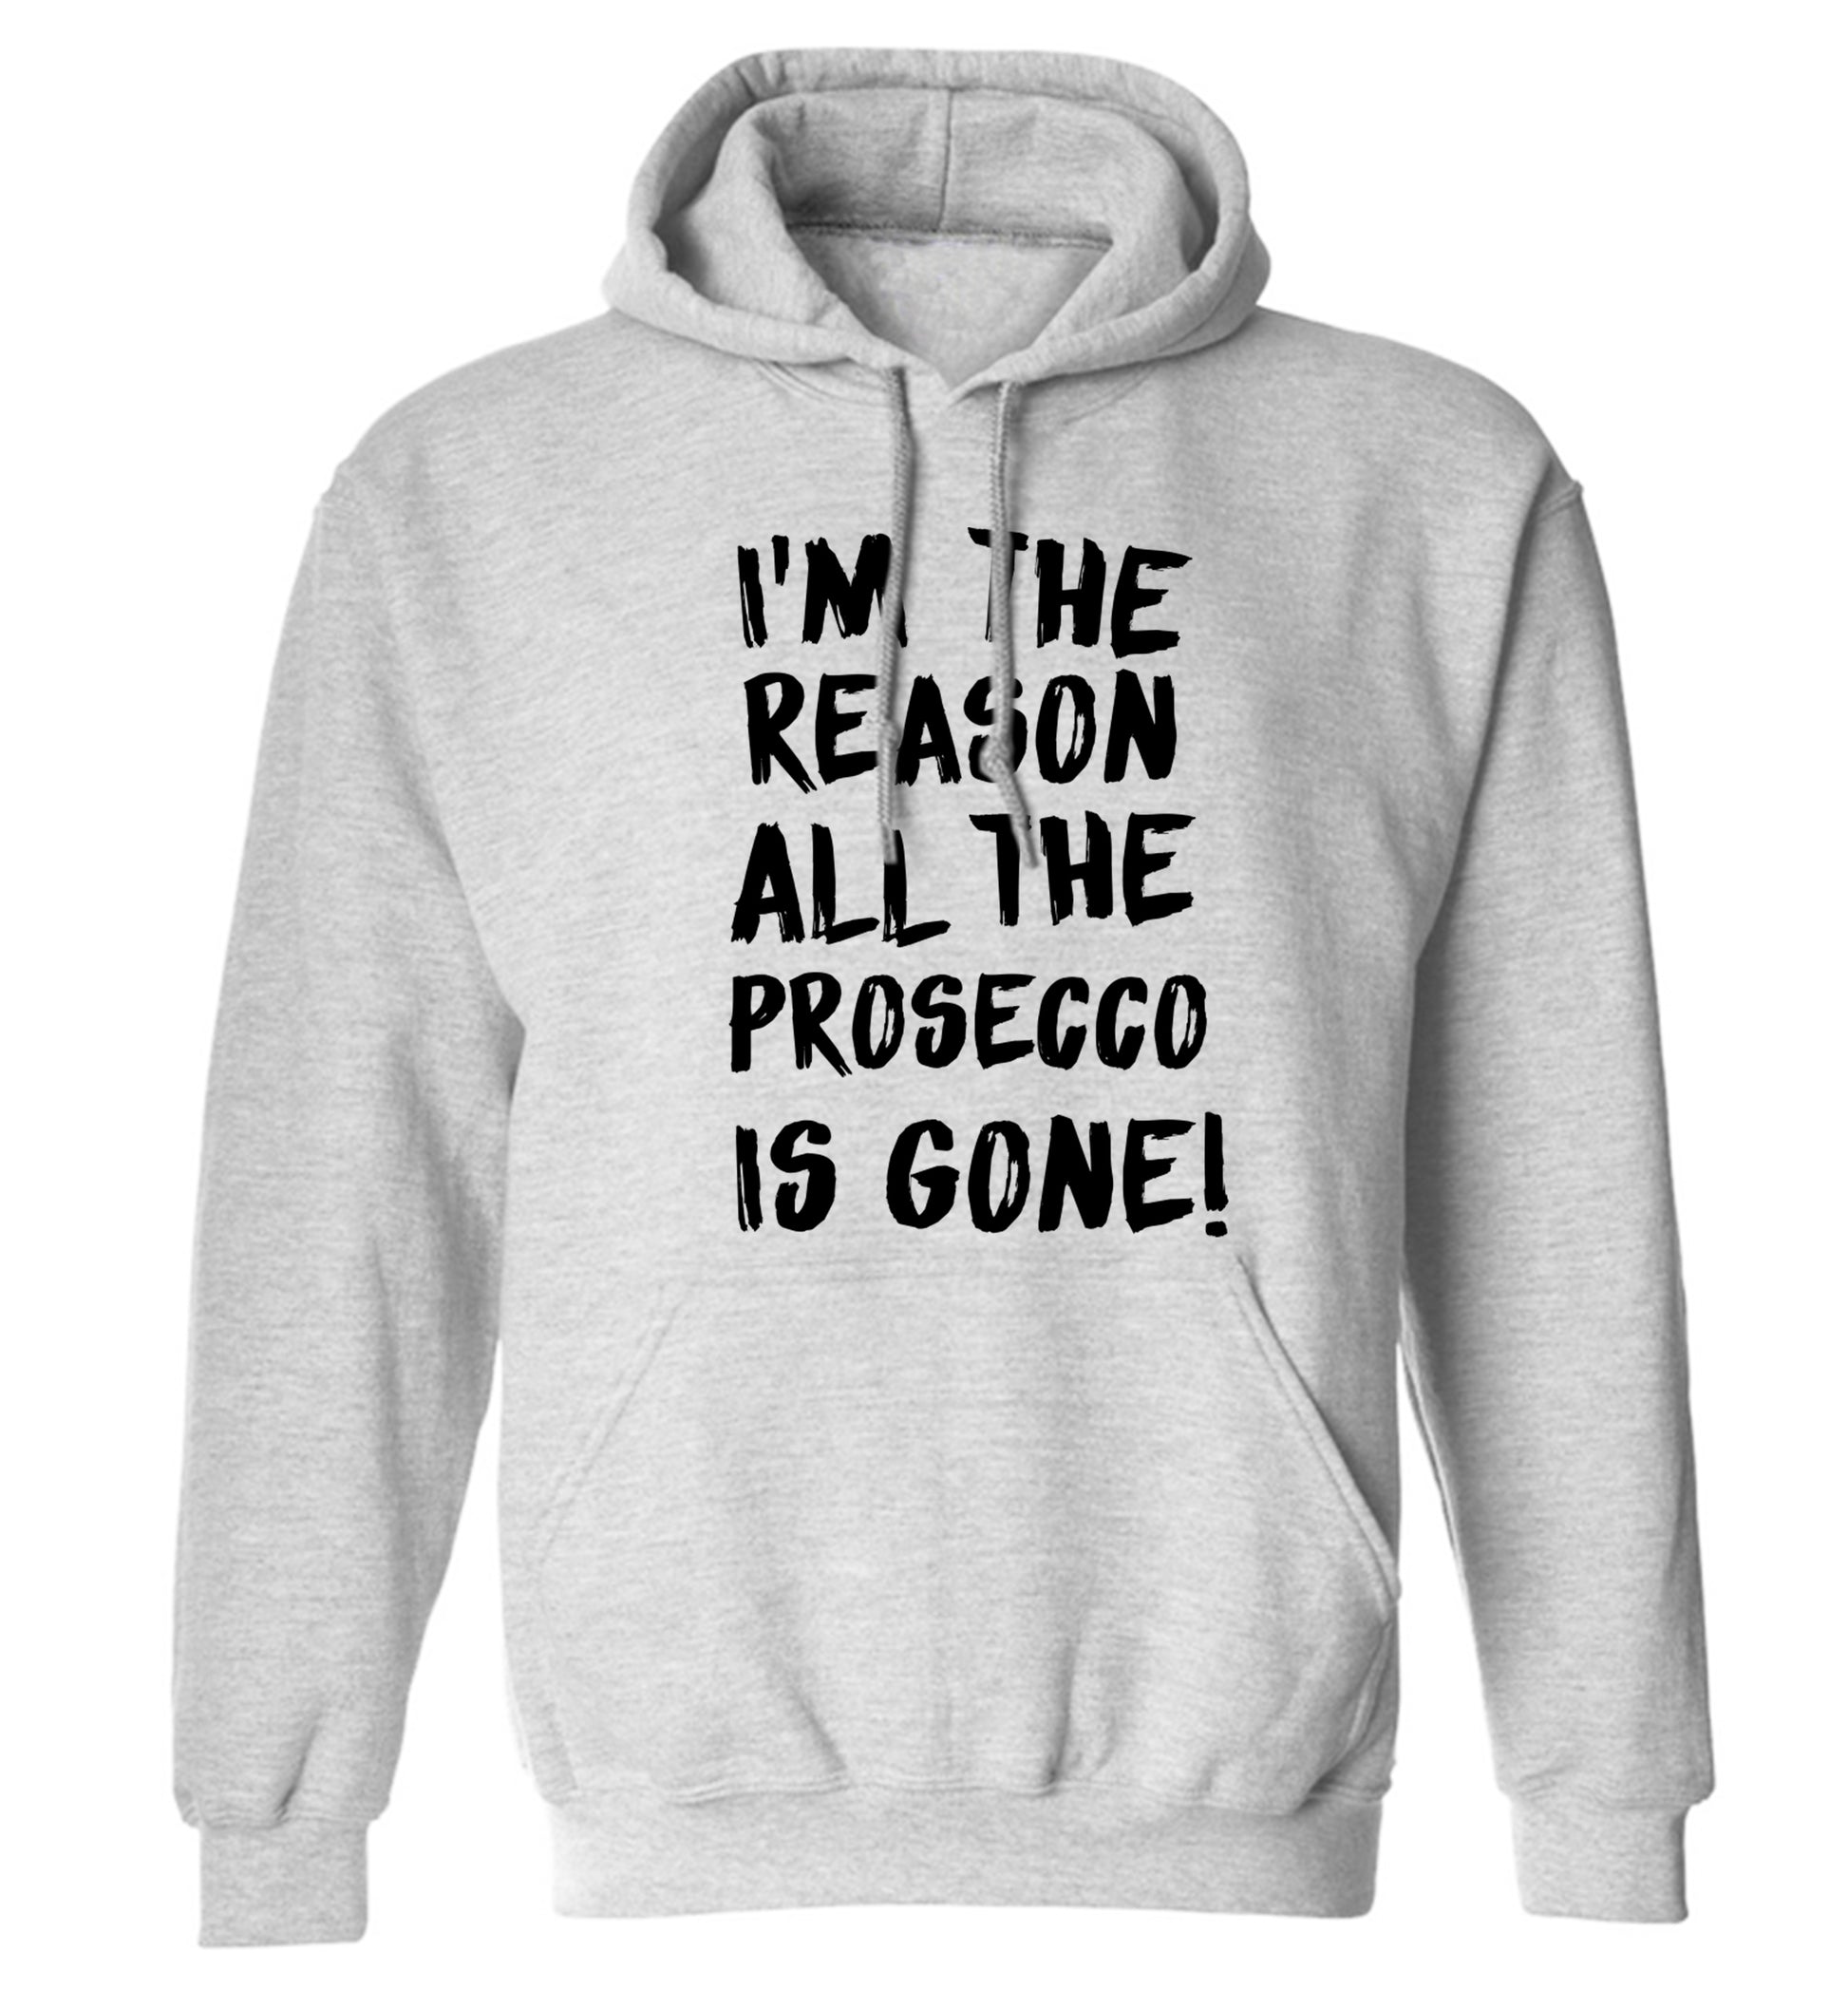 I'm the reason all the prosecco is gone adults unisex grey hoodie 2XL